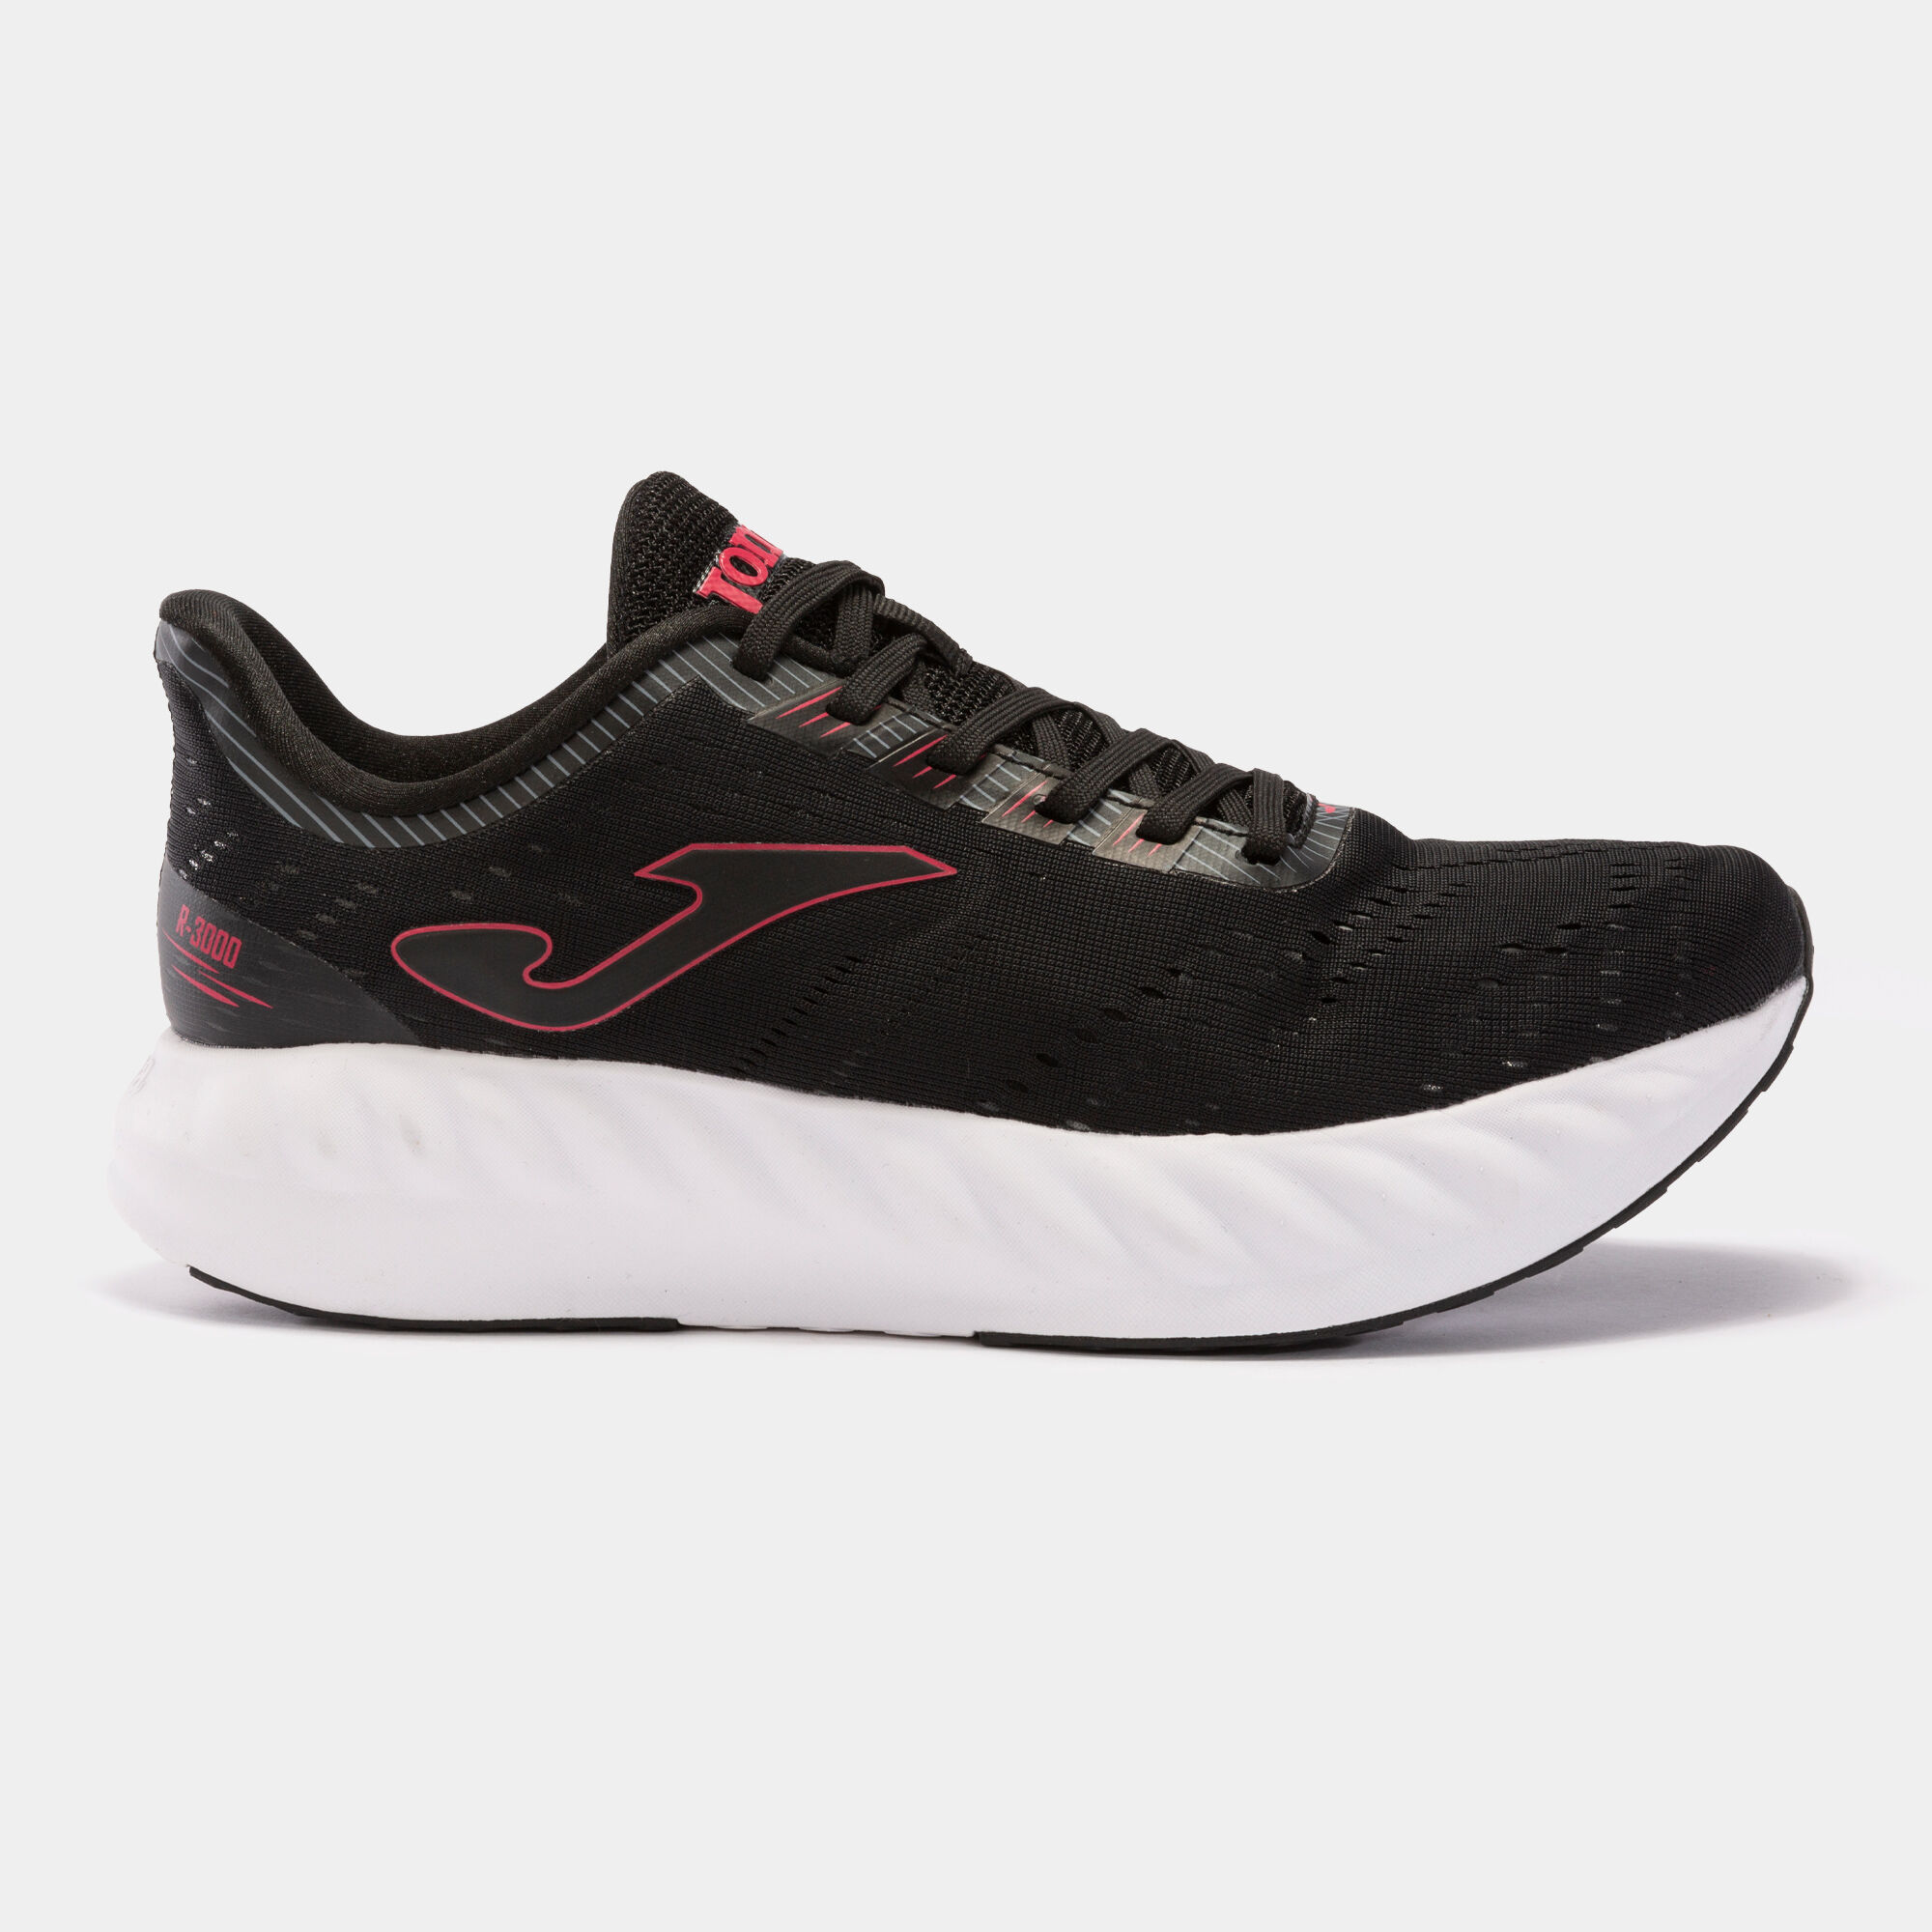 CHAUSSURES RUNNING R.3000 21 HOMME NOIR ROUGE